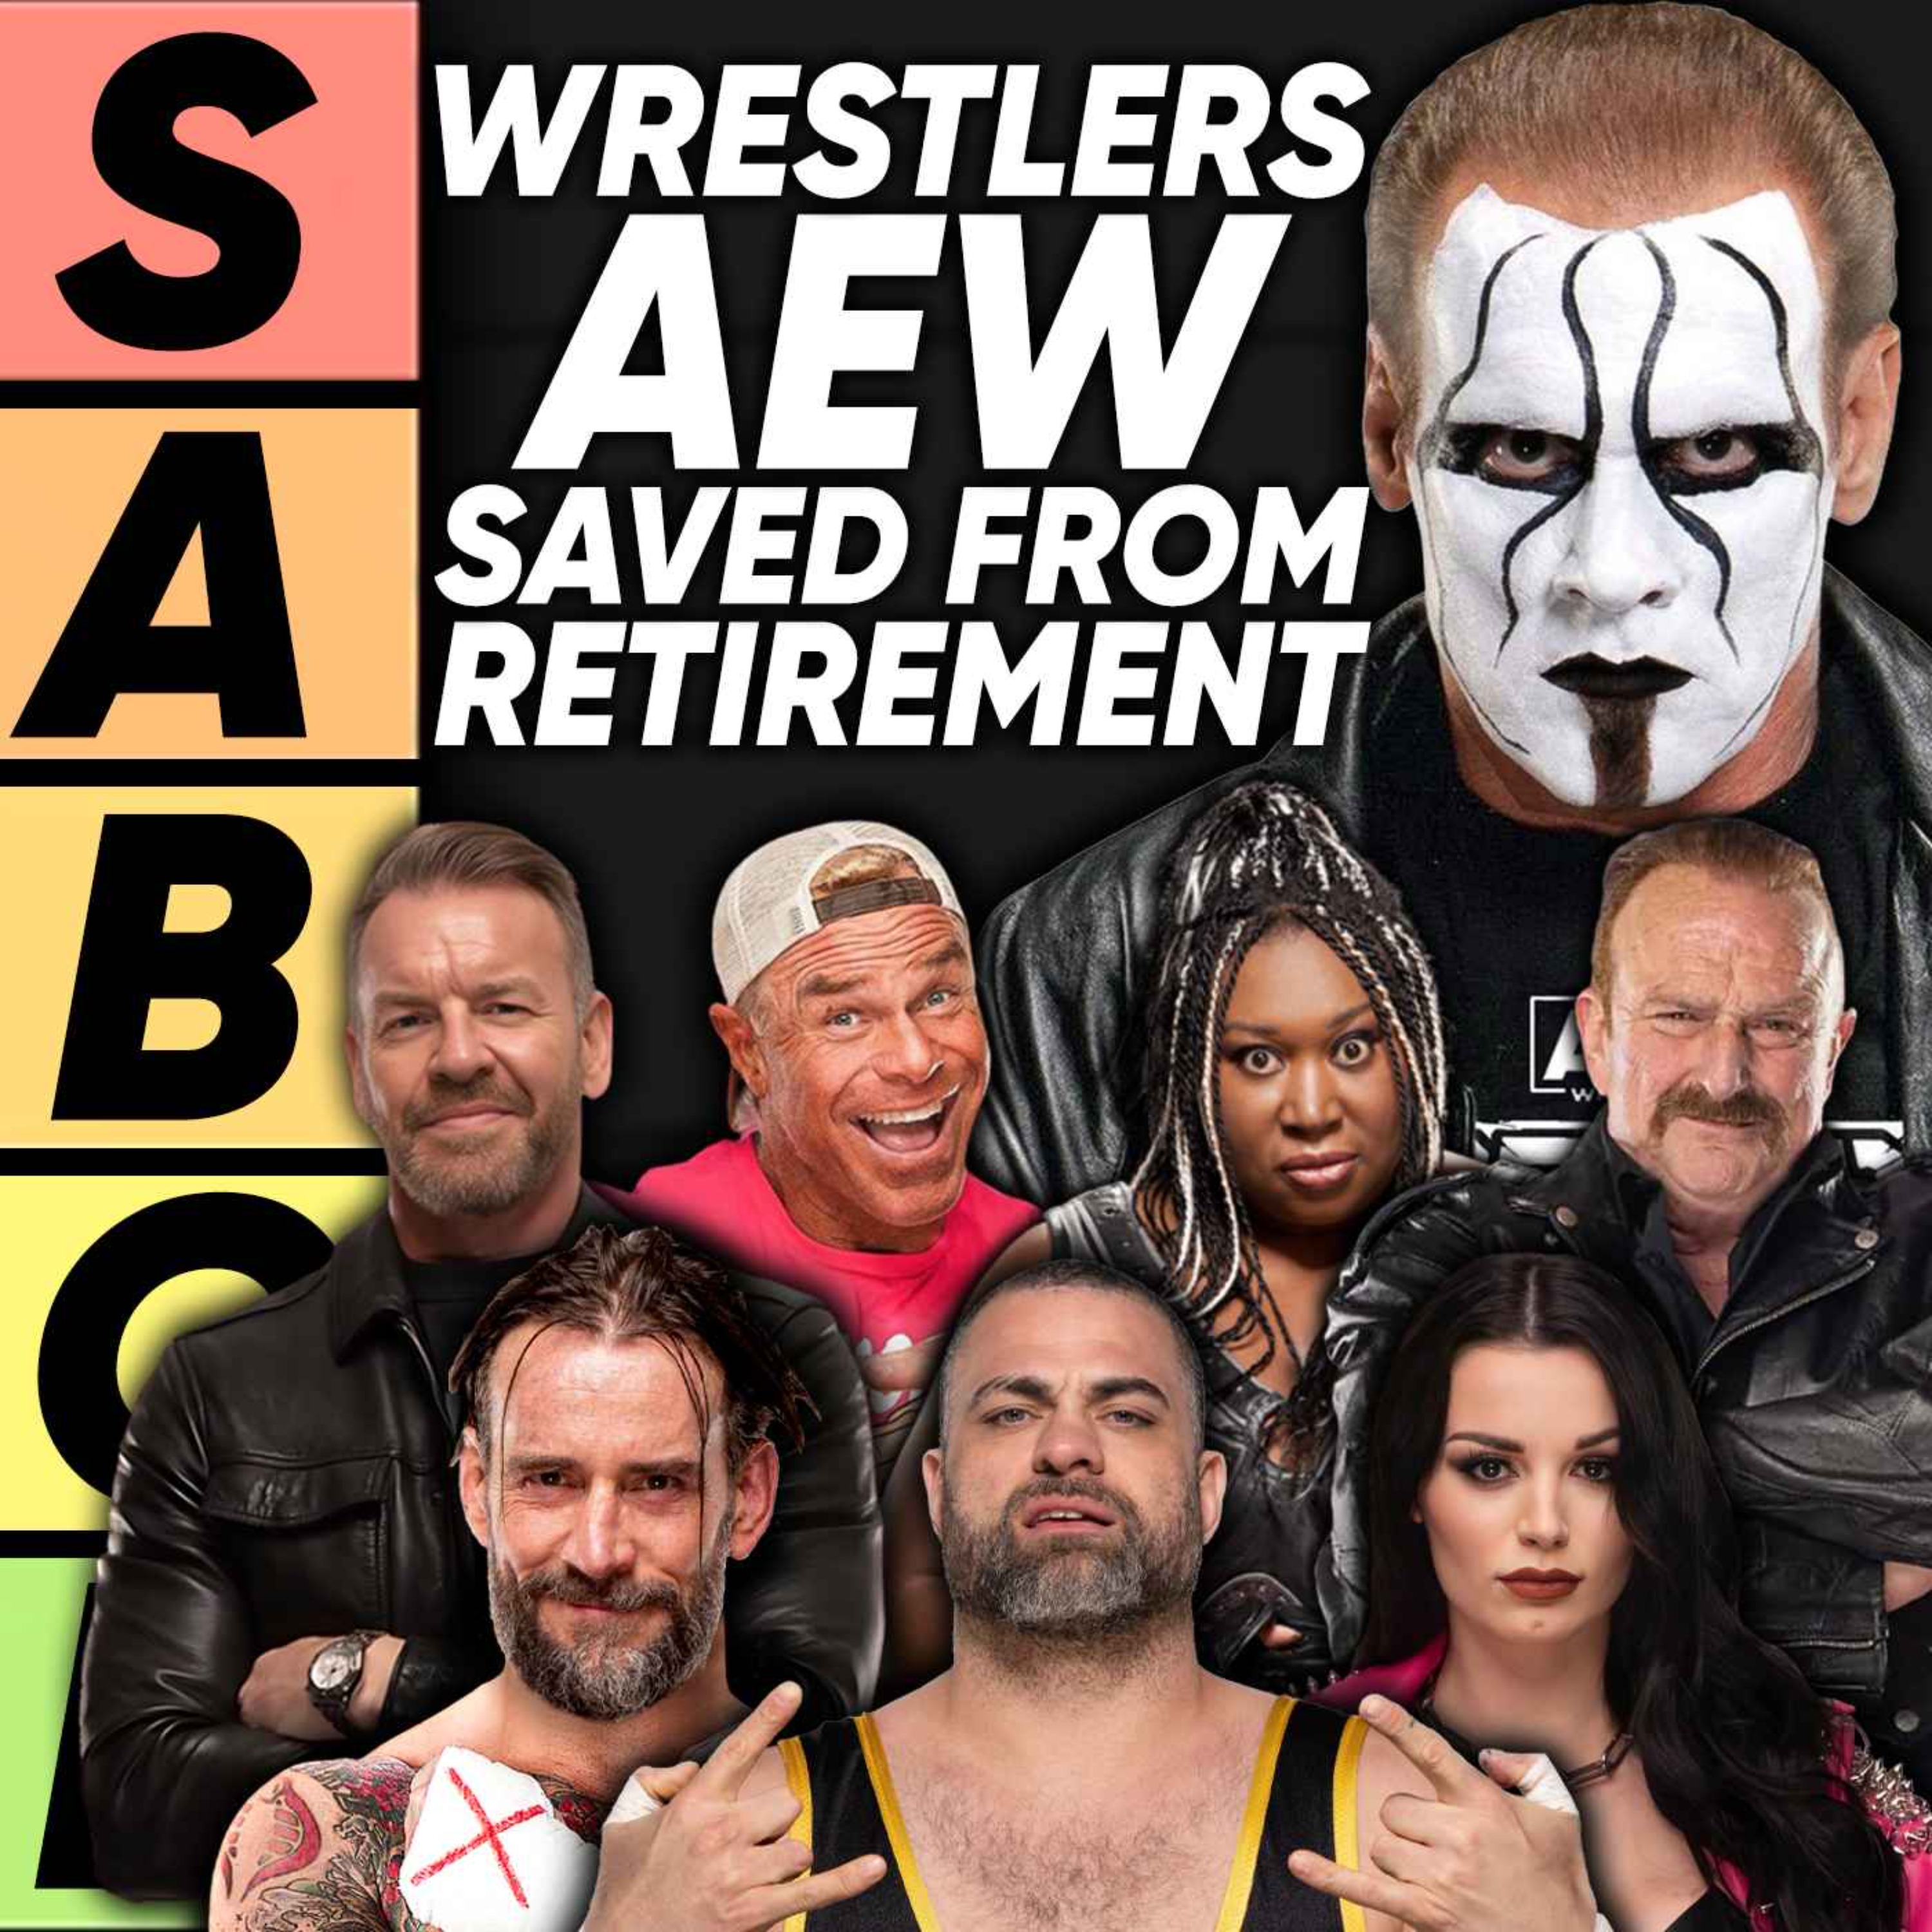 TIER LIST: Wrestlers AEW Saved From Retirement